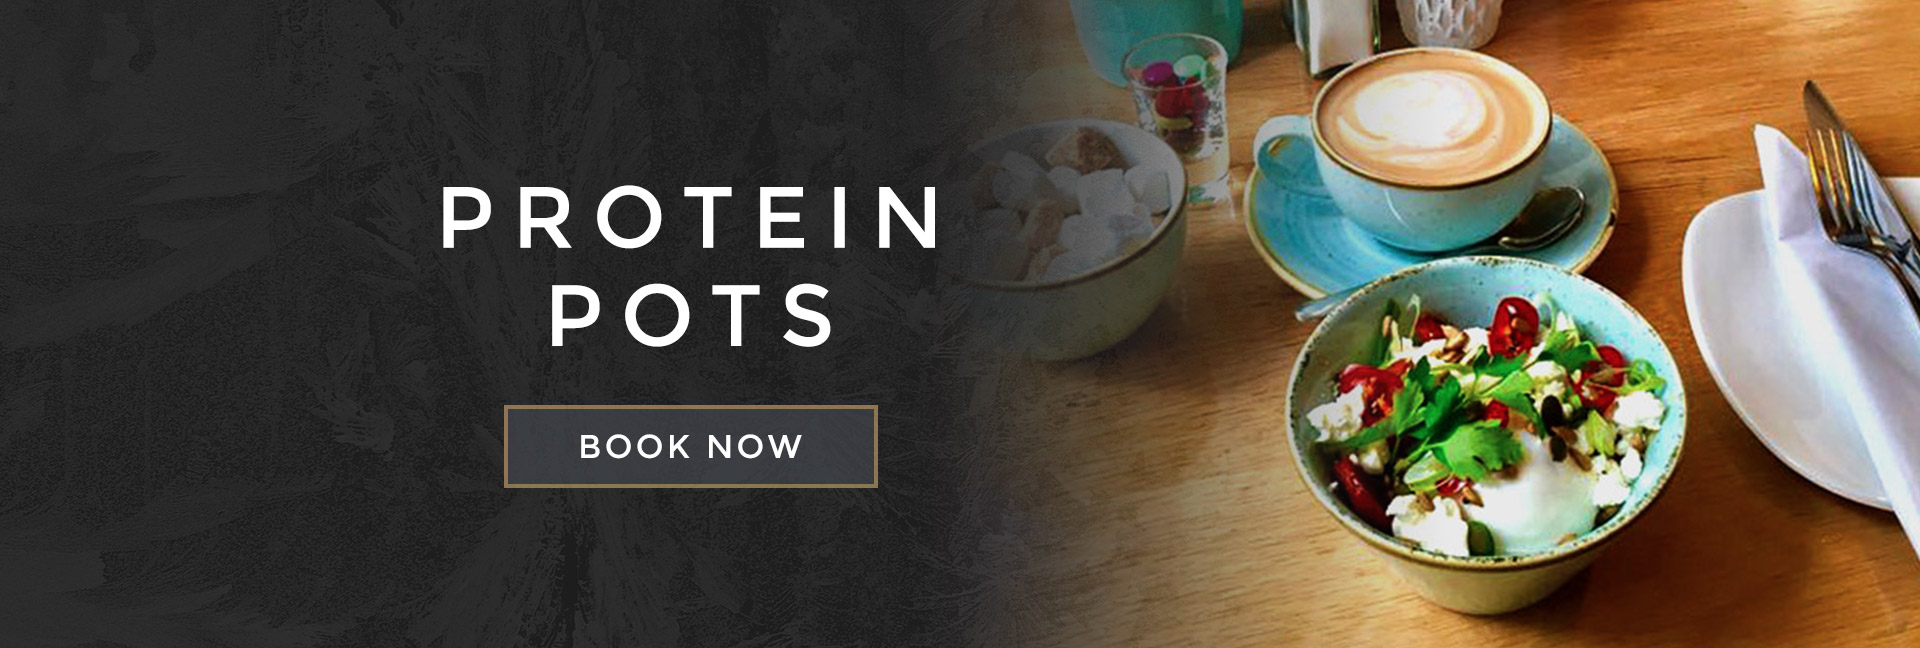 Protein pots at All Bar One New Oxford Street - Book your table